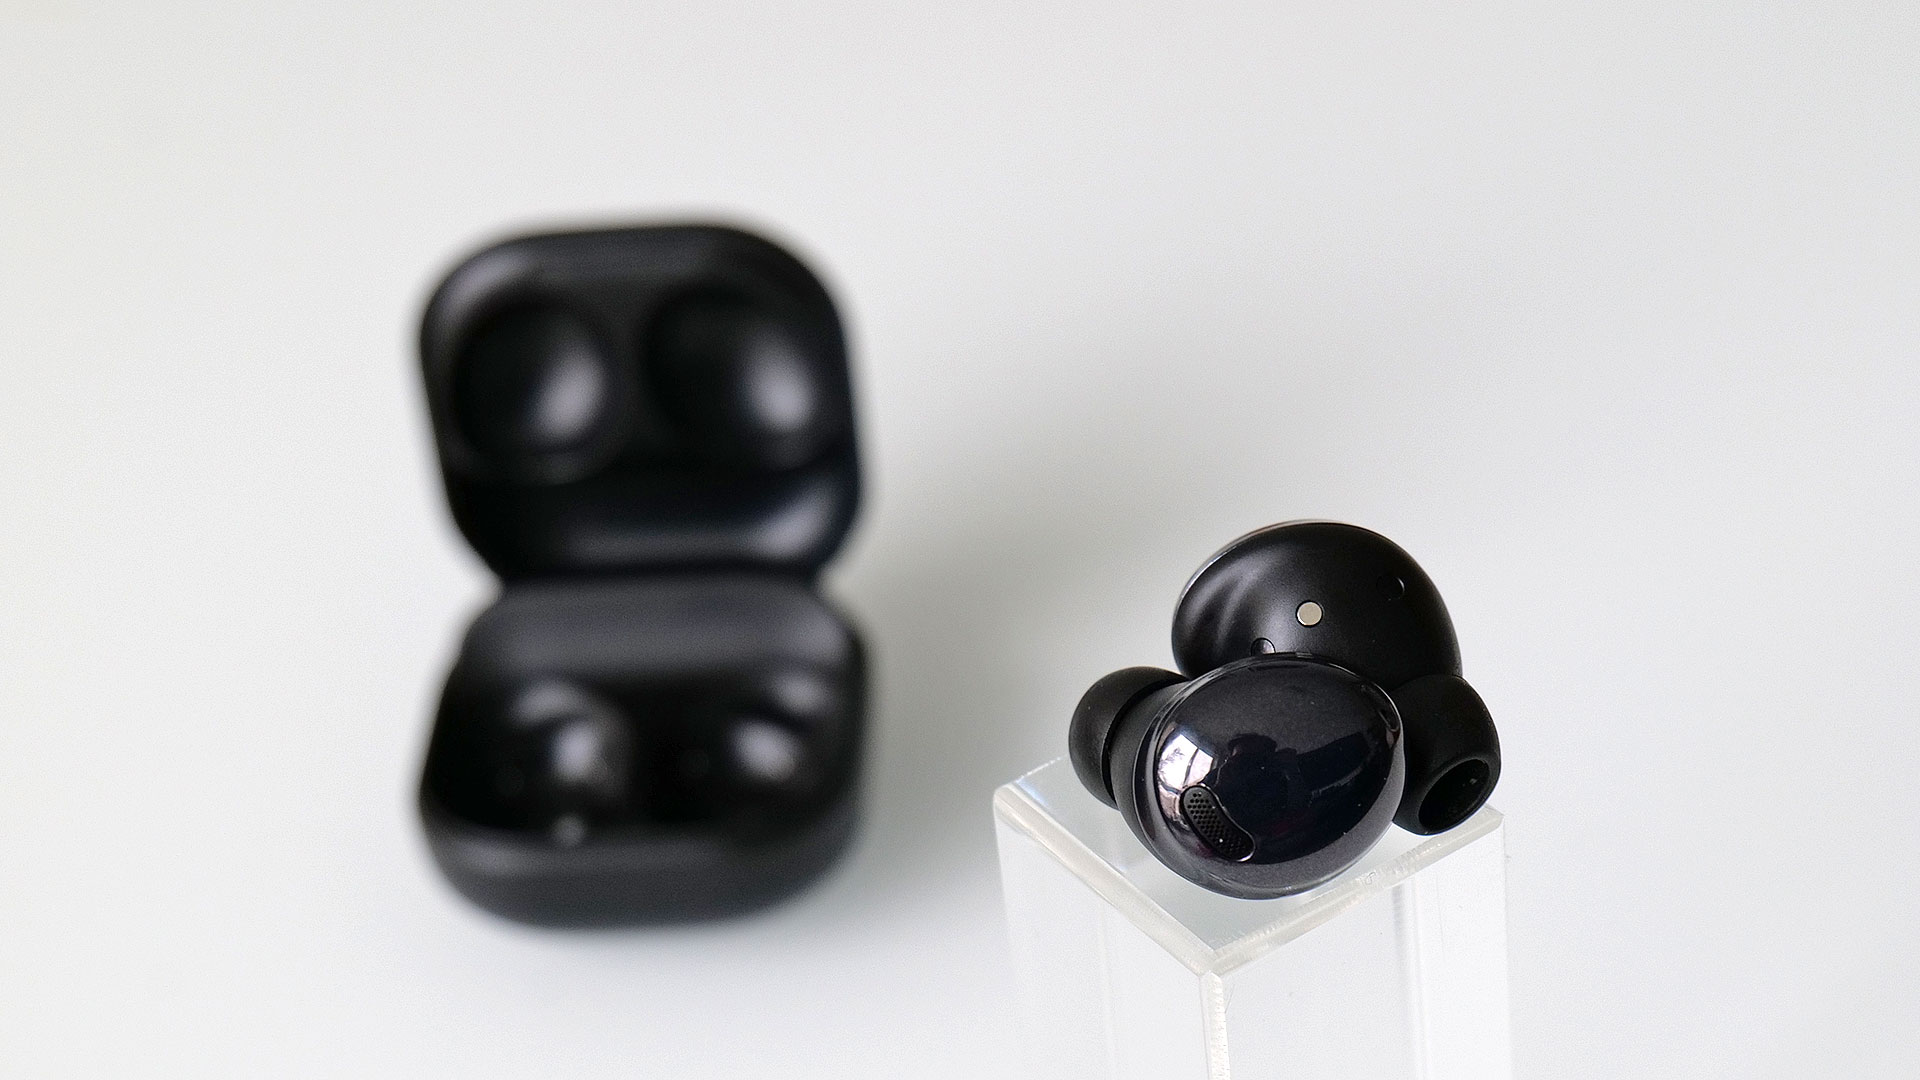 Samsung's head audio engineer says the Galaxy Buds Pro are a culmination of all tech used in previous Samsung earbuds over the past few years.  (Photo: Sam Rutherford)